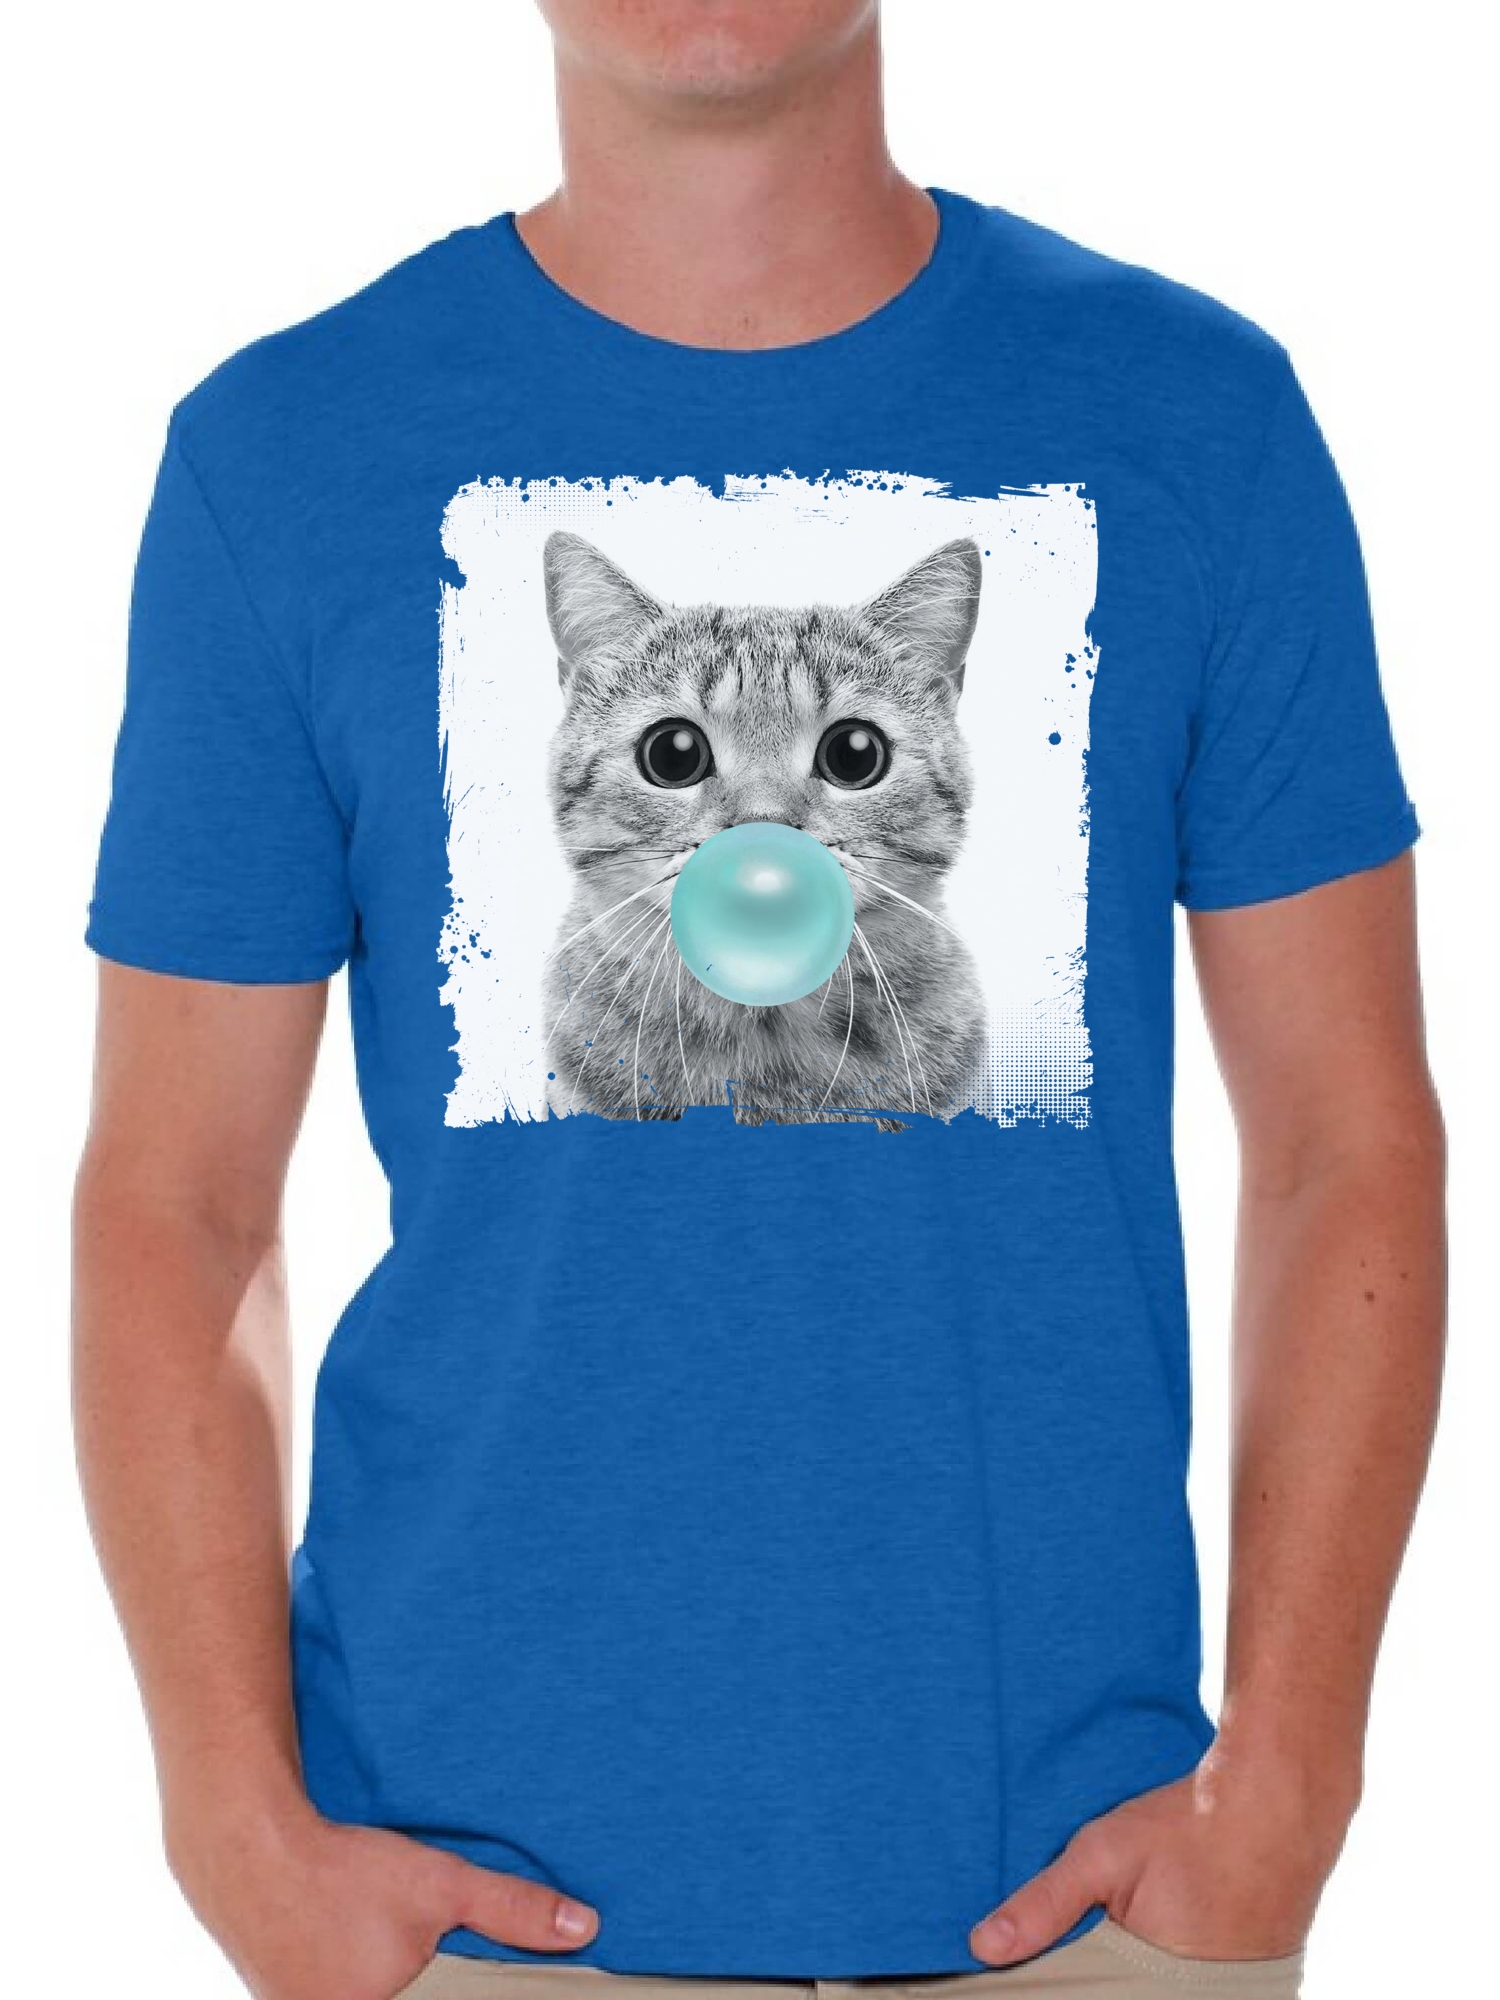 Awkward Styles Cat Blow Blue Gum T Shirt Cat Clothing Animal T-Shirt for Men Funny Animal Gifts Cat T Shirt Cute Animal T Shirt Funny Cat Shirt Gifts for Him Funny Men T Shirt Little Cat Tshirt - image 1 of 4